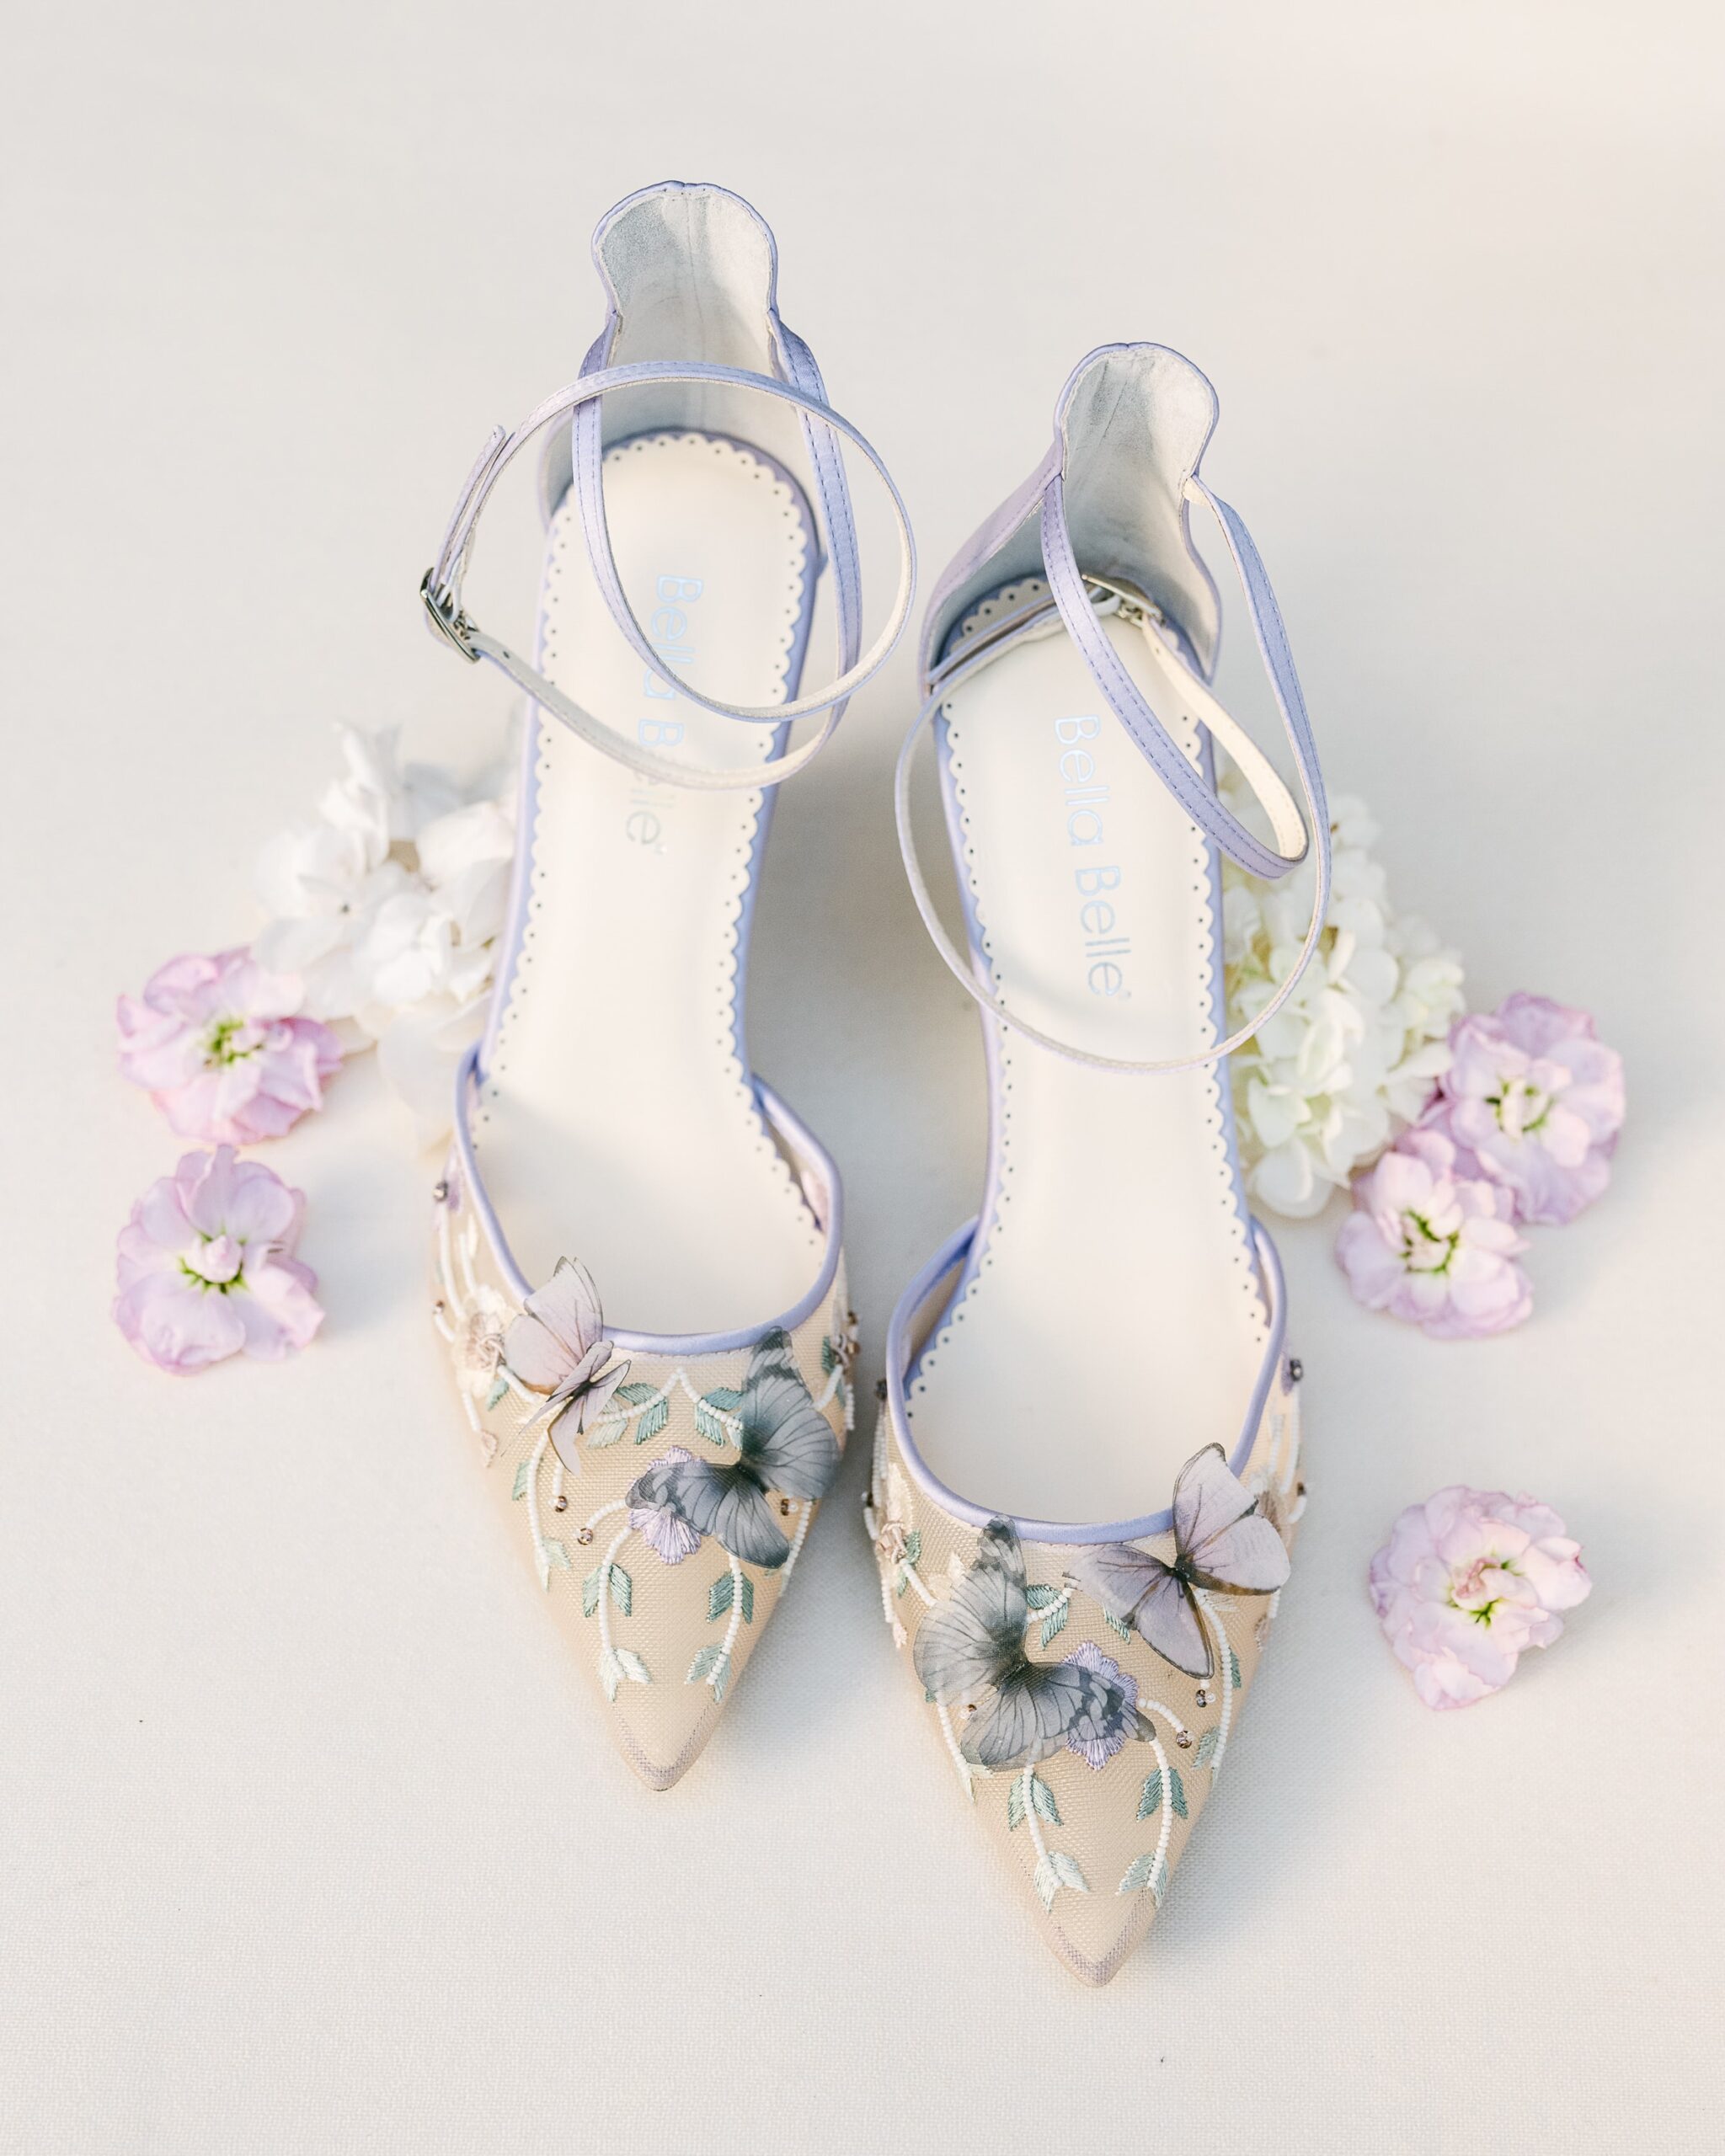 Bella Belle Eve bridal shoes by Serenity Photography